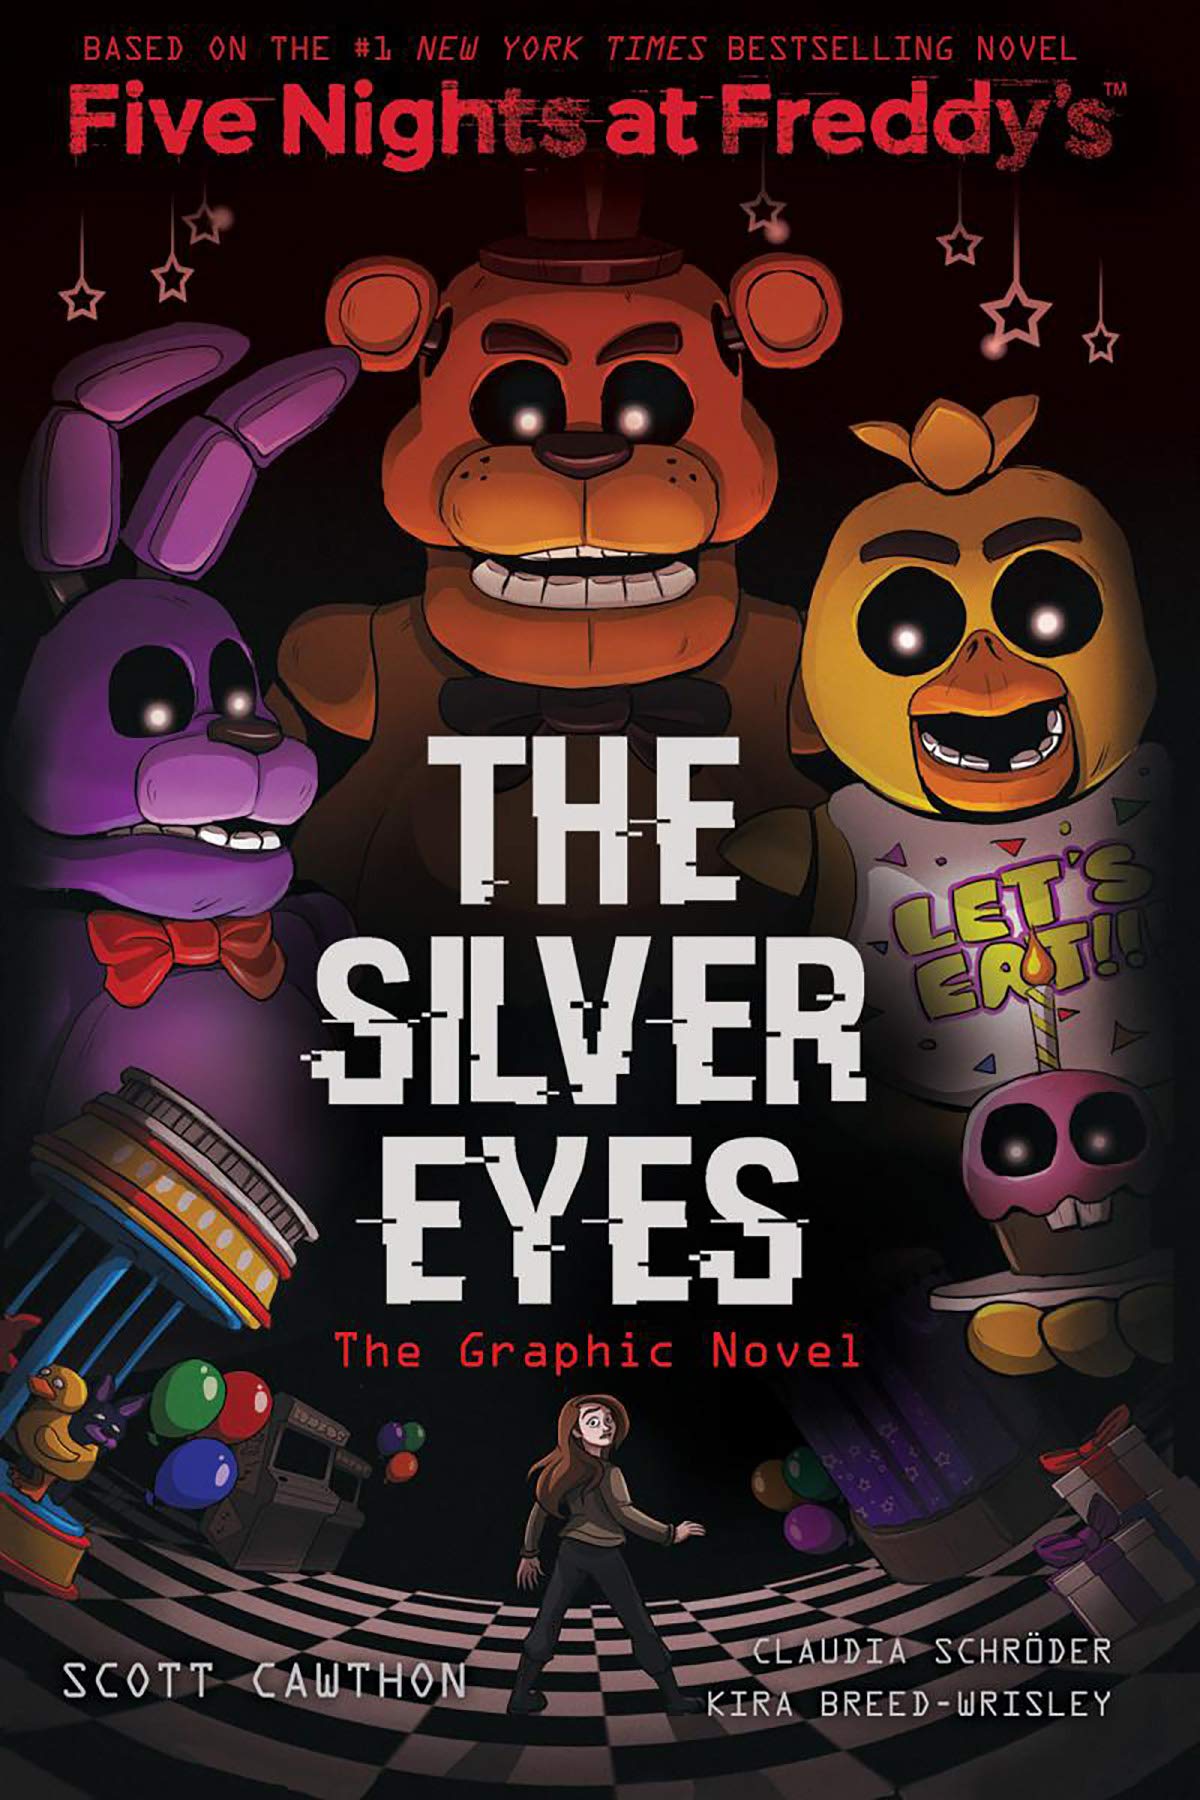 The Silver Eyes Five Nights at Freddy's Graphic Novel, Amazon